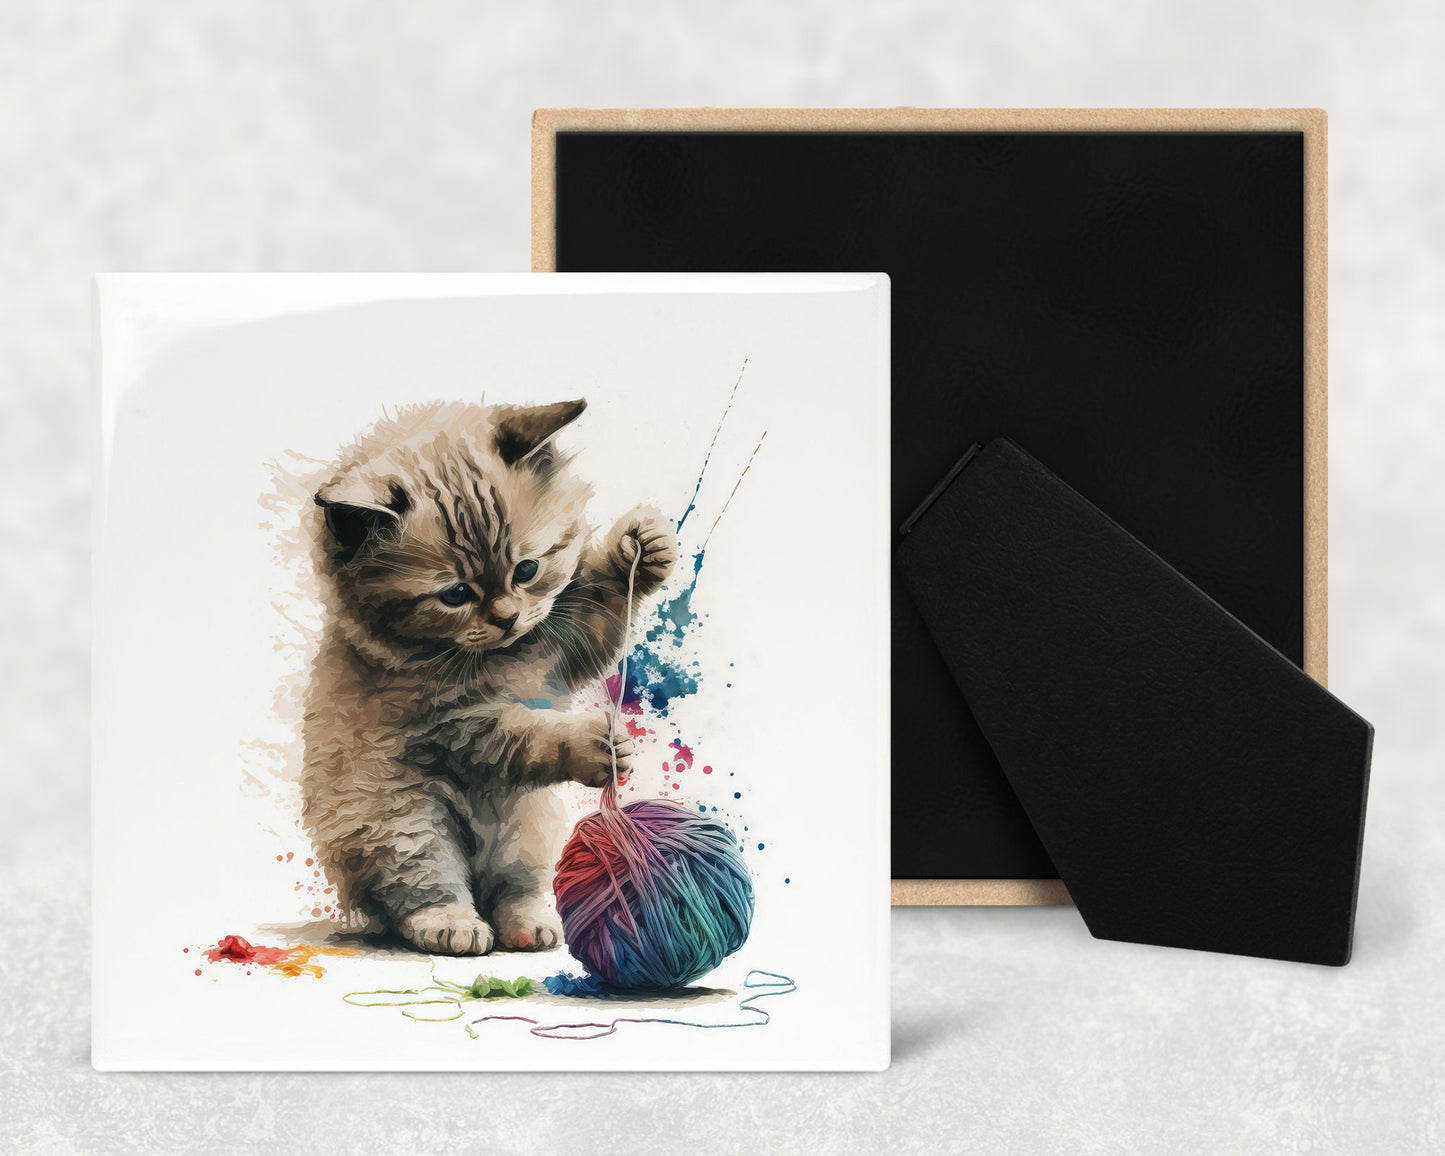 Cute Kitten with String Art Decorative Ceramic Tile Set with Optional Easel Back - Available in 4 sizes - Set of 4